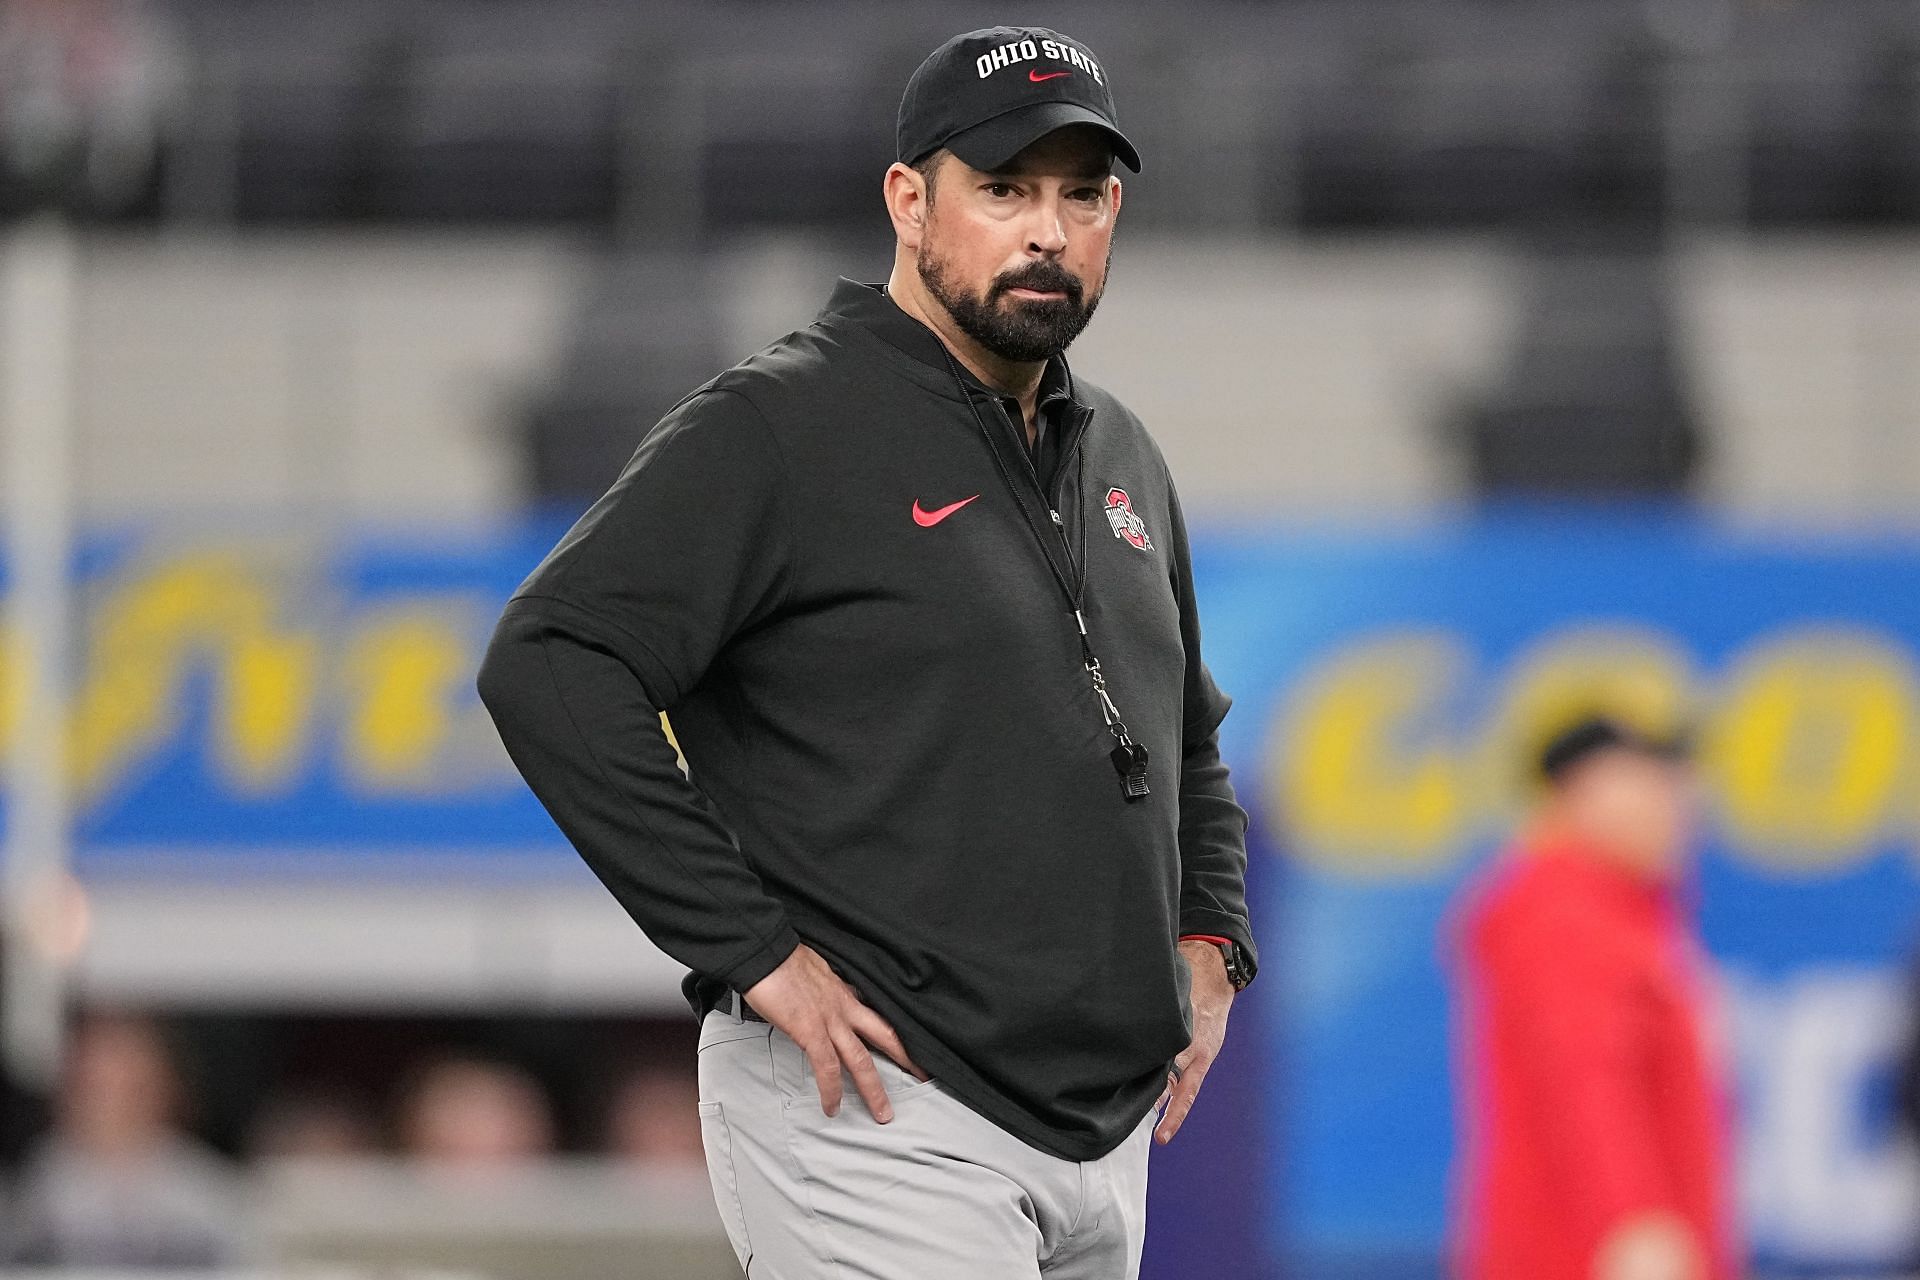 Ohio State Buckeyes football: Coach Ryan Day's future is in doubt